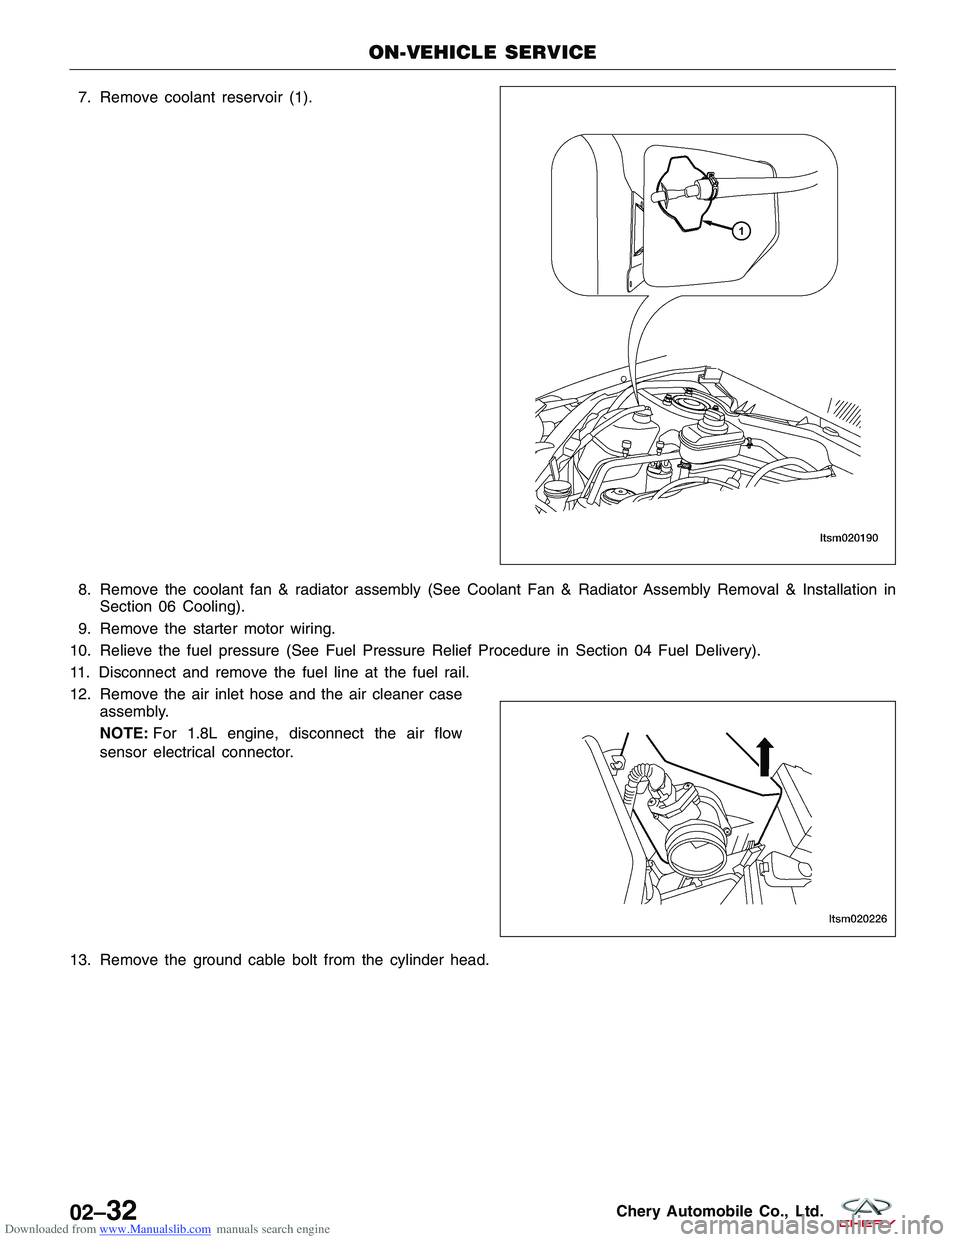 CHERY TIGGO 2009  Service Repair Manual Downloaded from www.Manualslib.com manuals search engine 7. Remove coolant reservoir (1).
8. Remove the coolant fan & radiator assembly (See Coolant Fan & Radiator Assembly Removal & Installation inSe